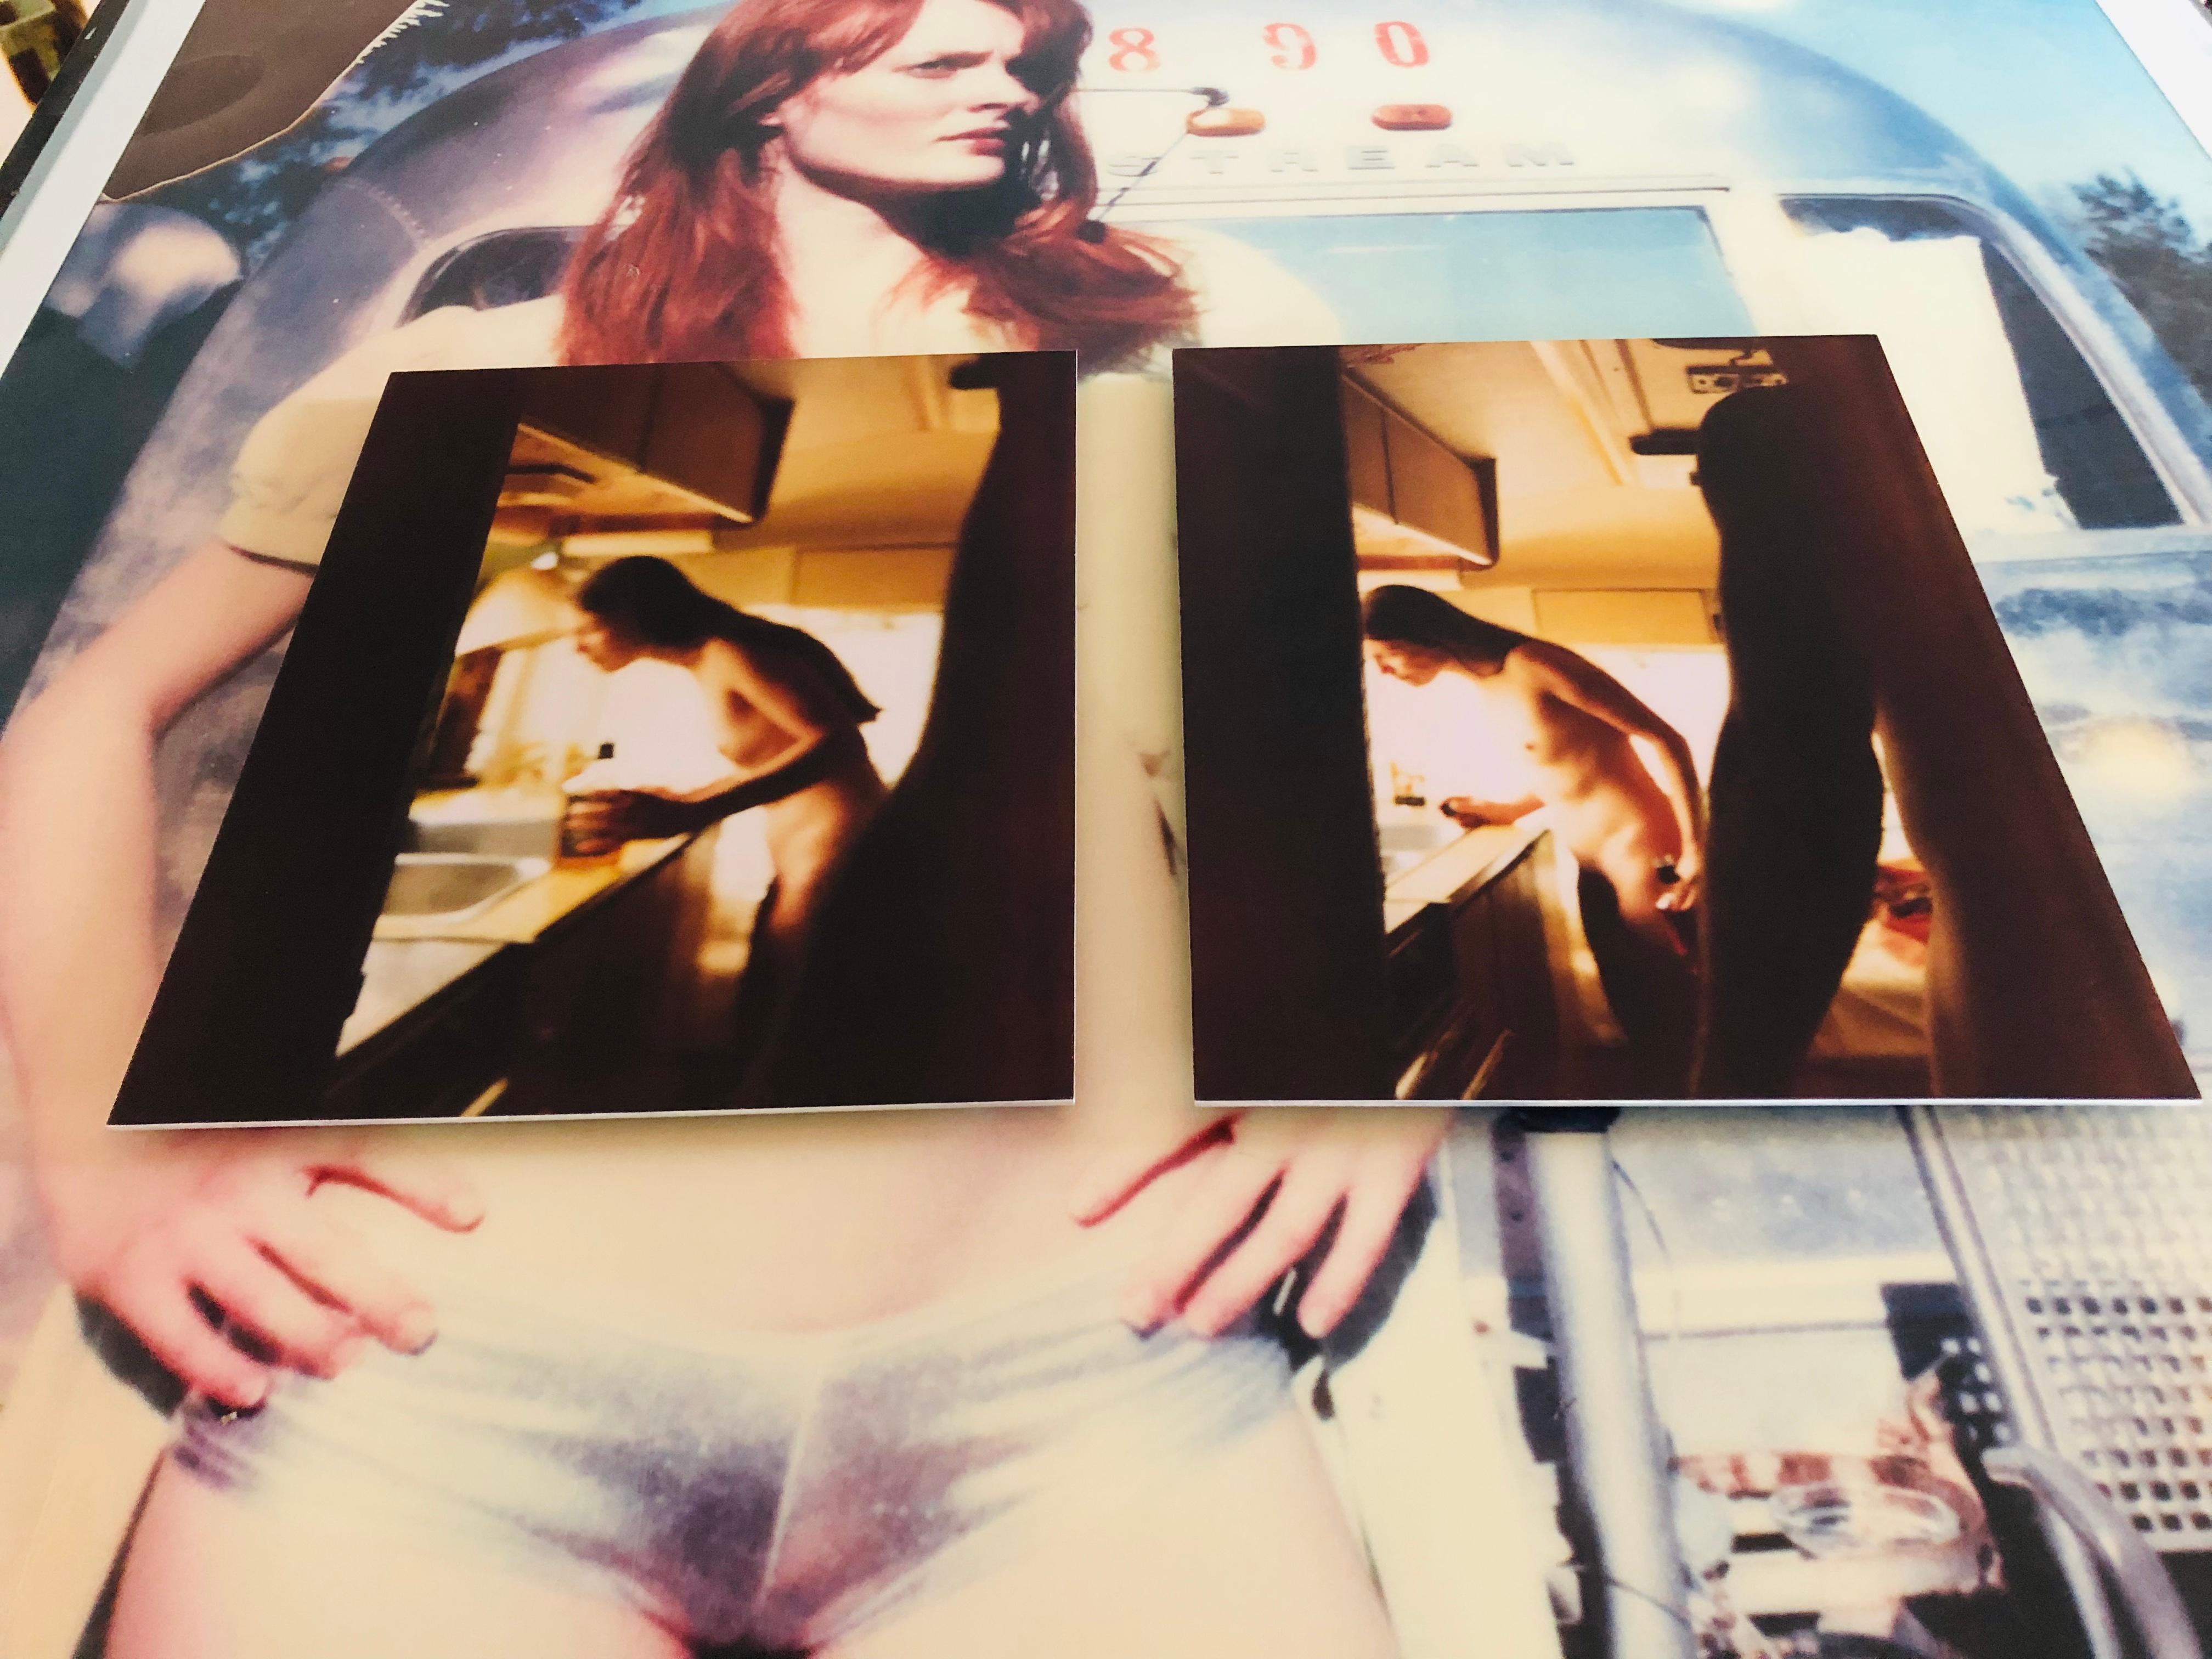 Whisky and Water VI - Sidewinder - Diptych, Polaroid, Nude, 21st Century, Color - Contemporary Photograph by Stefanie Schneider